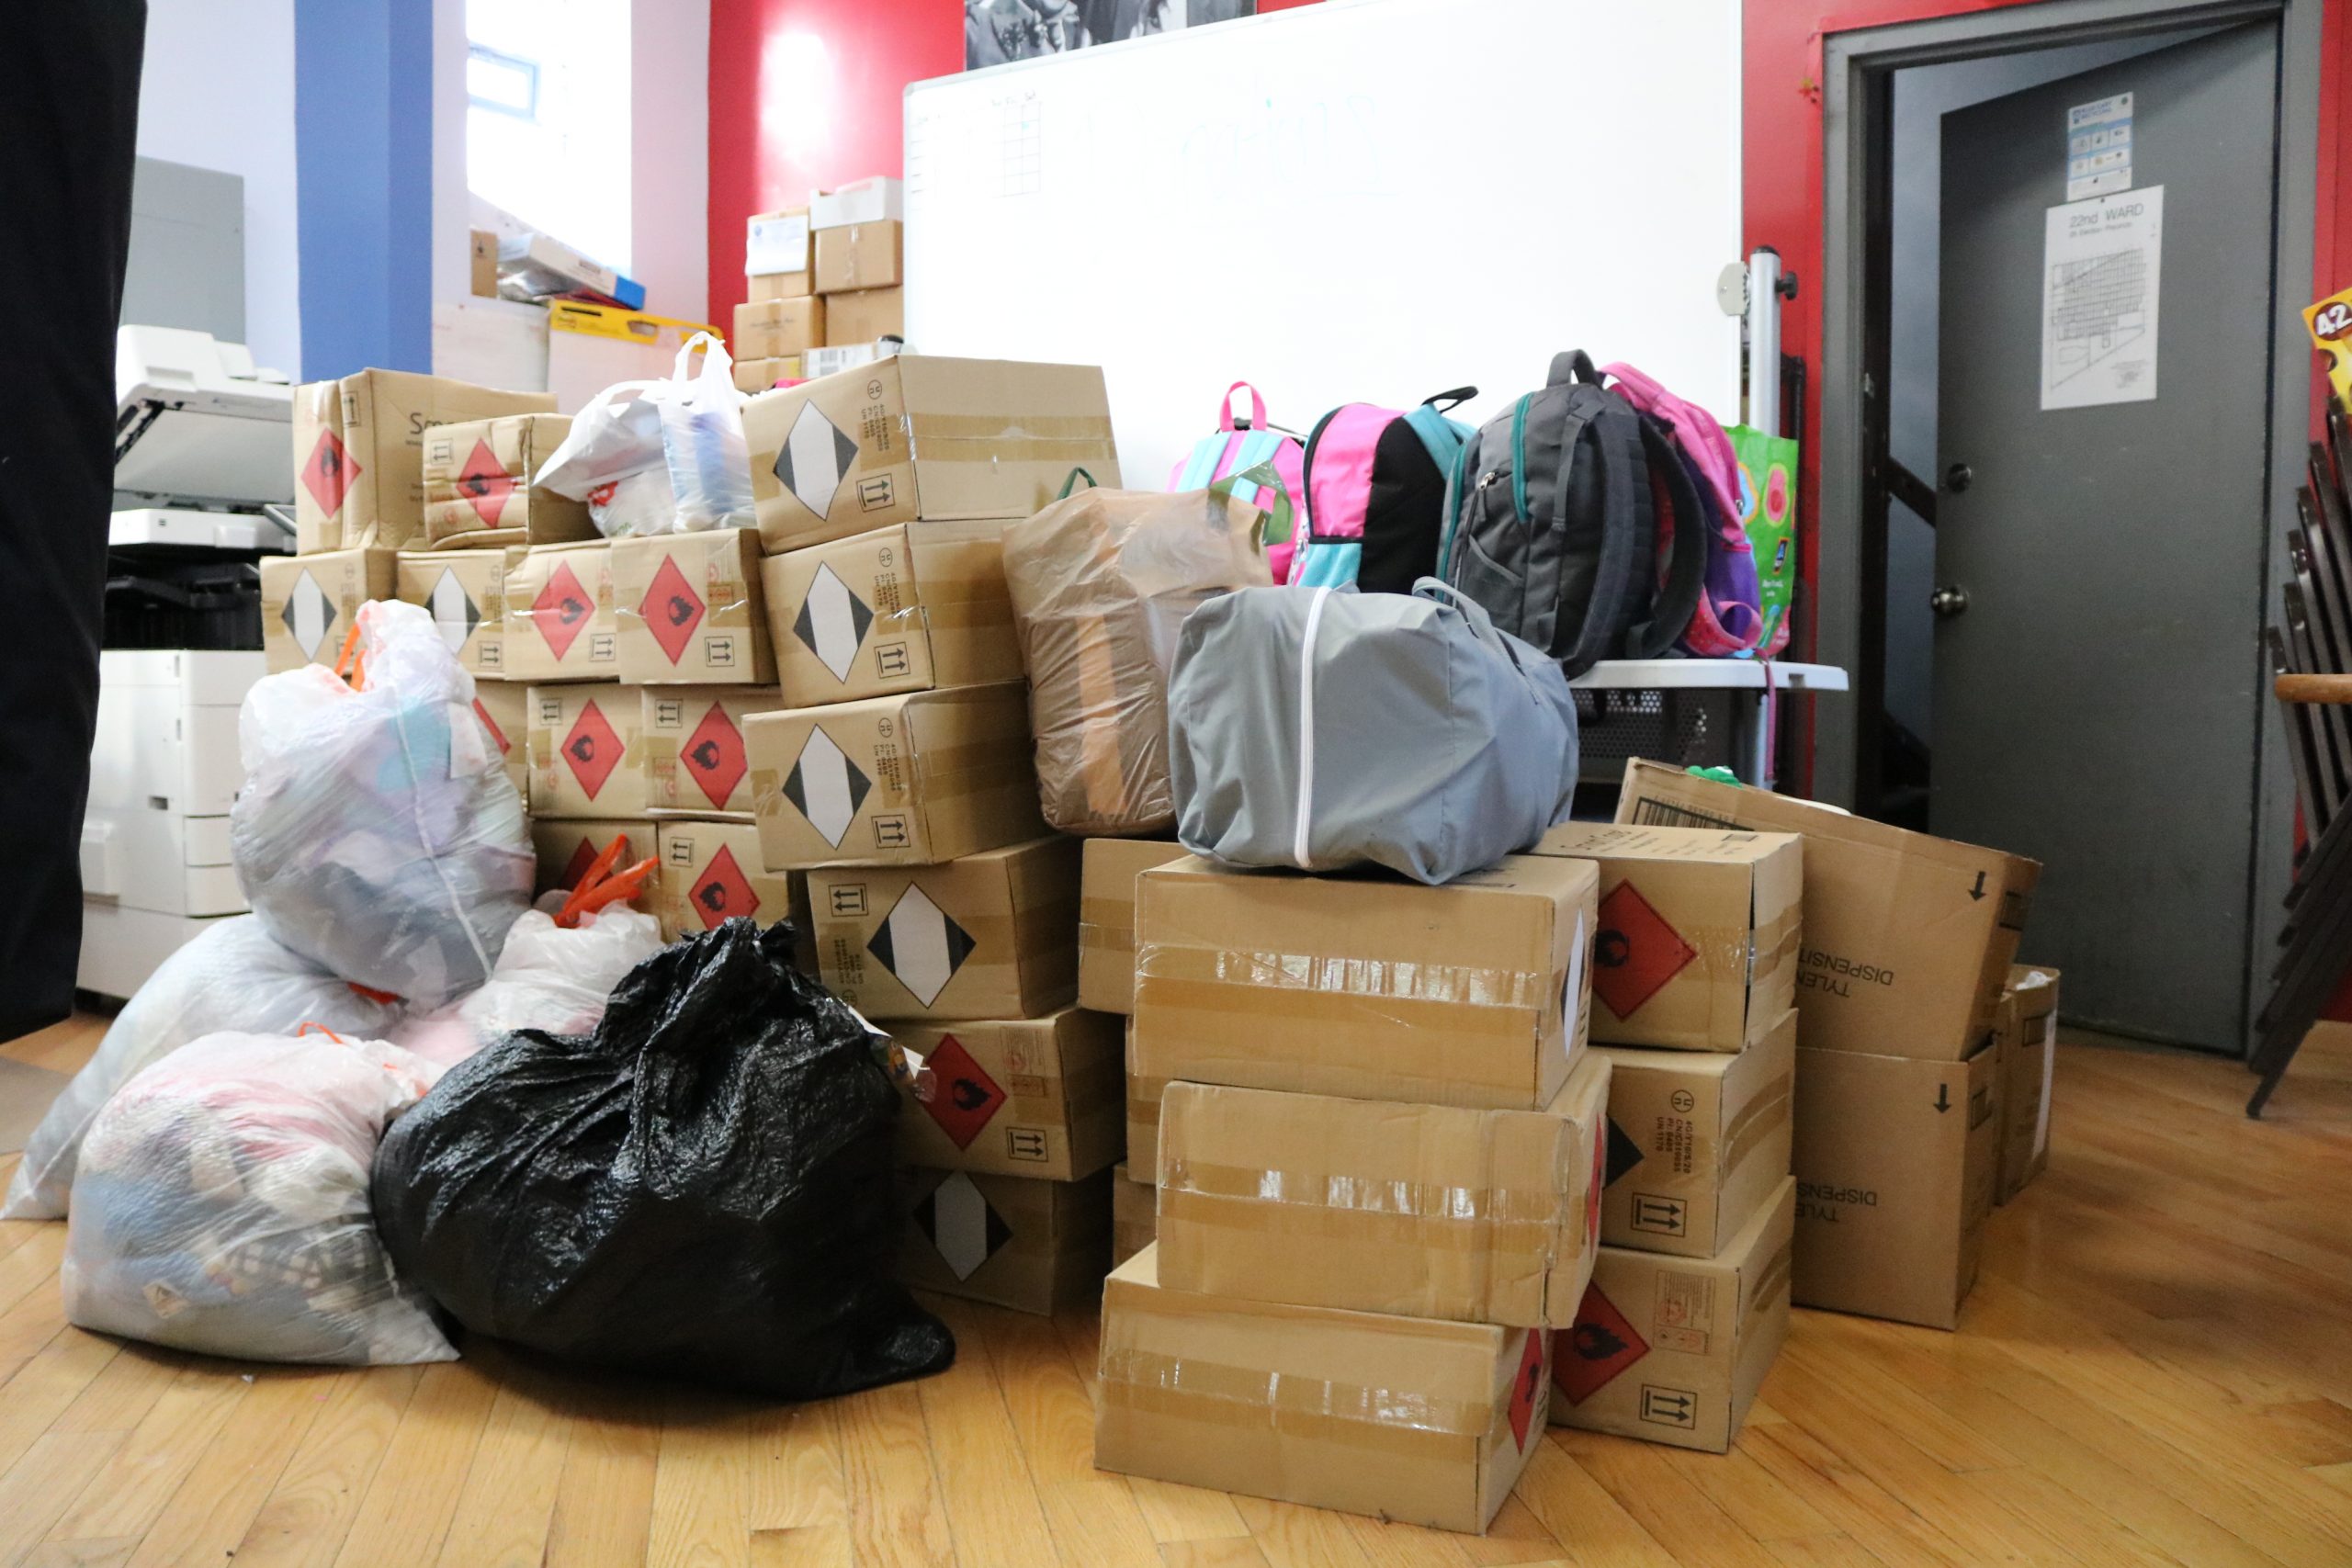 Cardboard boxes, garbage bags and backpacks full of donations are piled up in the corner of an alderman's office